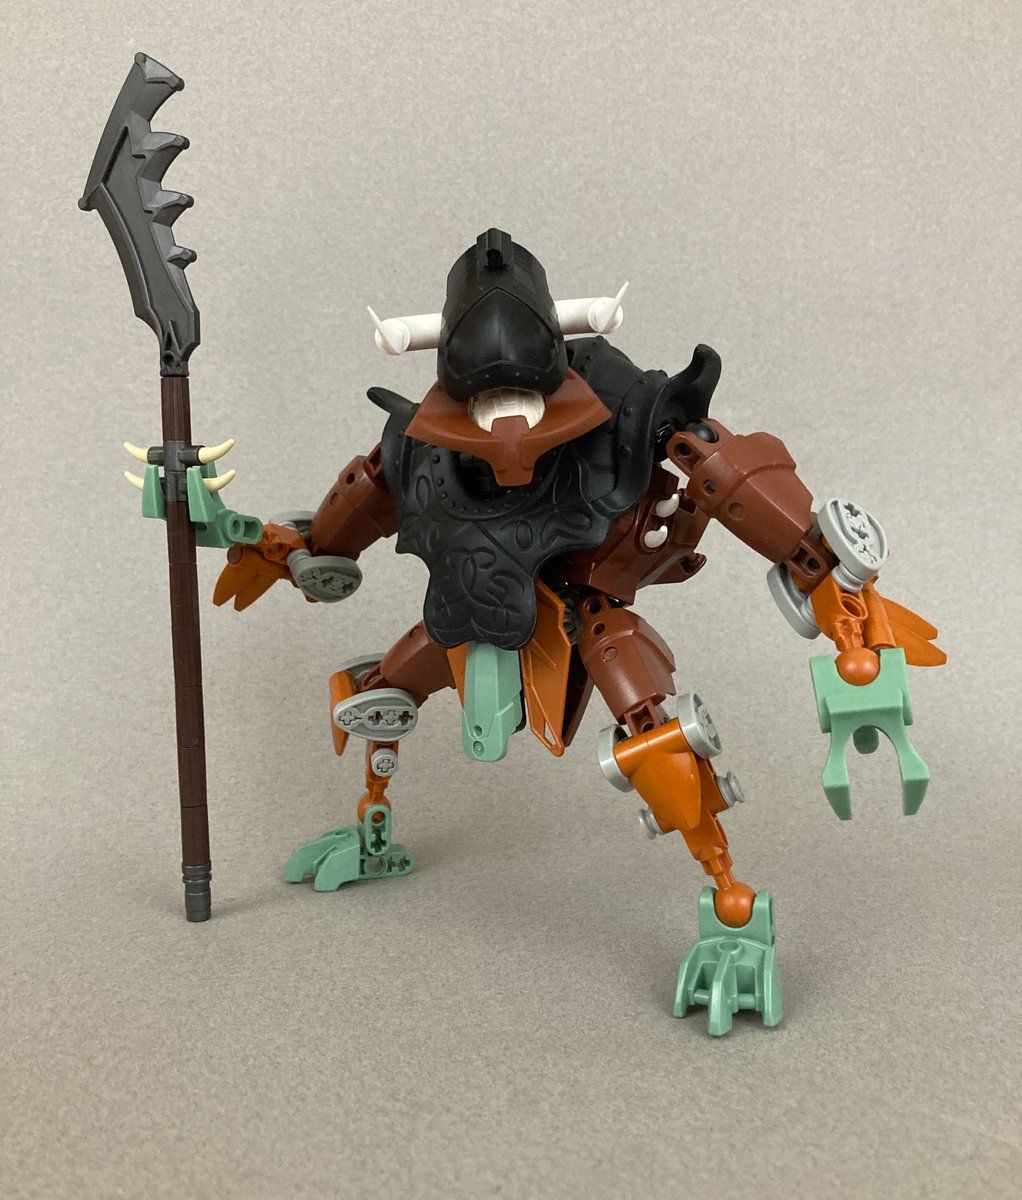 Highwayman Diúirbh

His foul temperament is matched only by his odor...

#レゴ #LEGO #bionicle #galidor